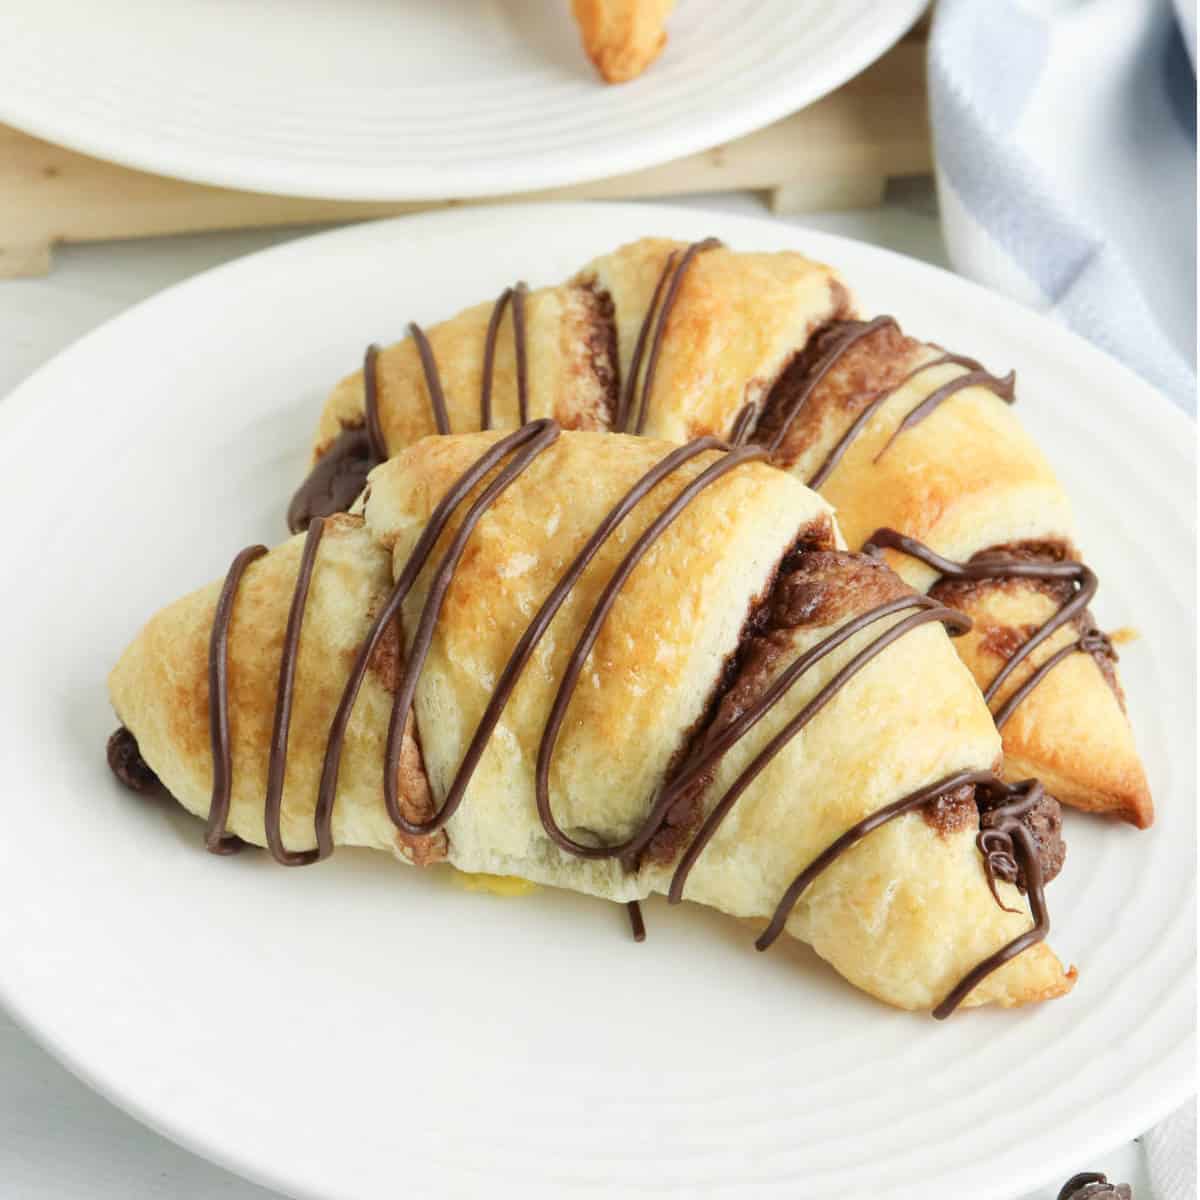 baked crescent rolls with Nutella drizzled on them.